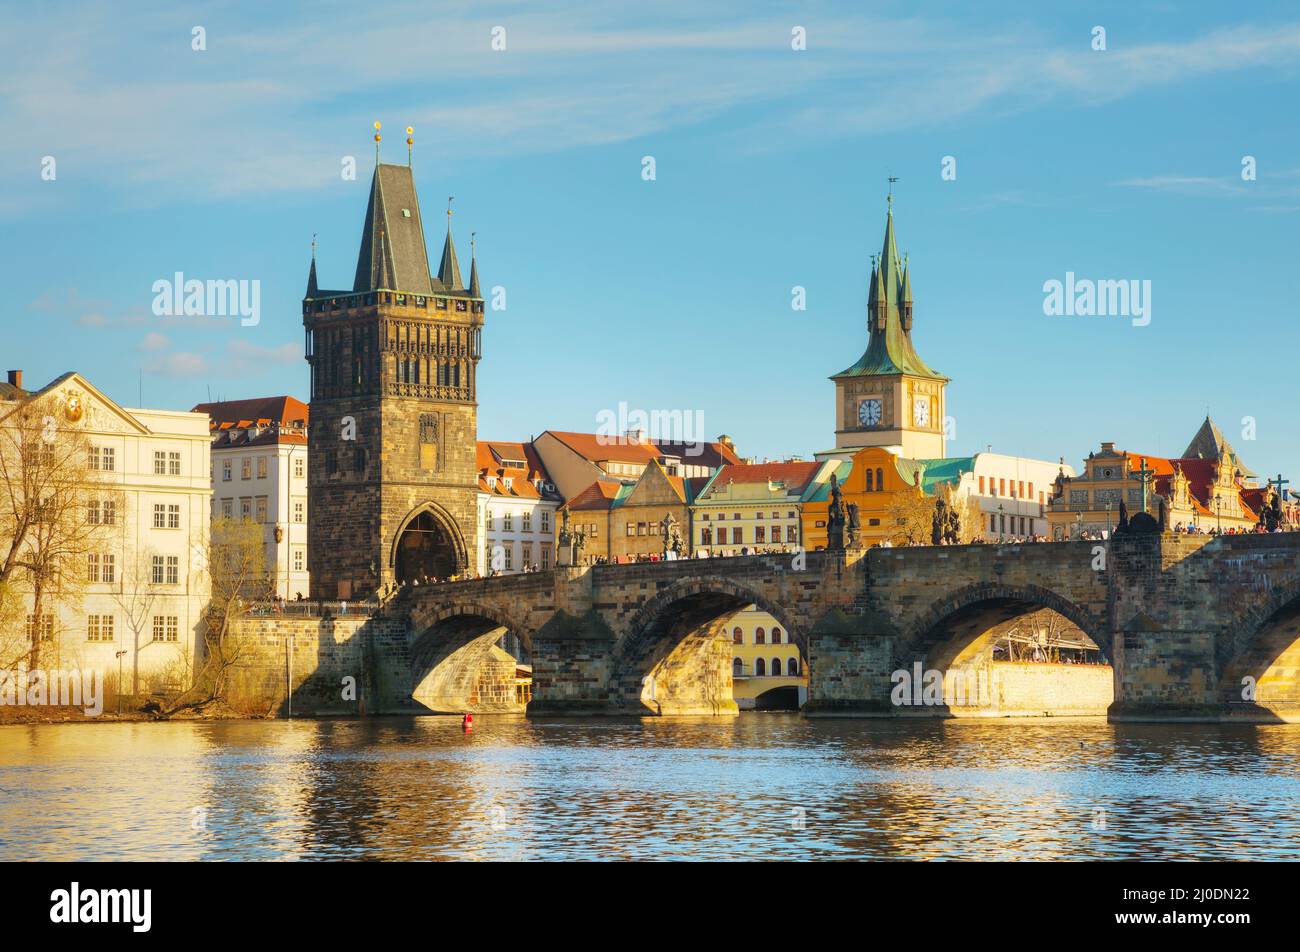 The Old Town with Charles bridge tower in Prague Stock Photo